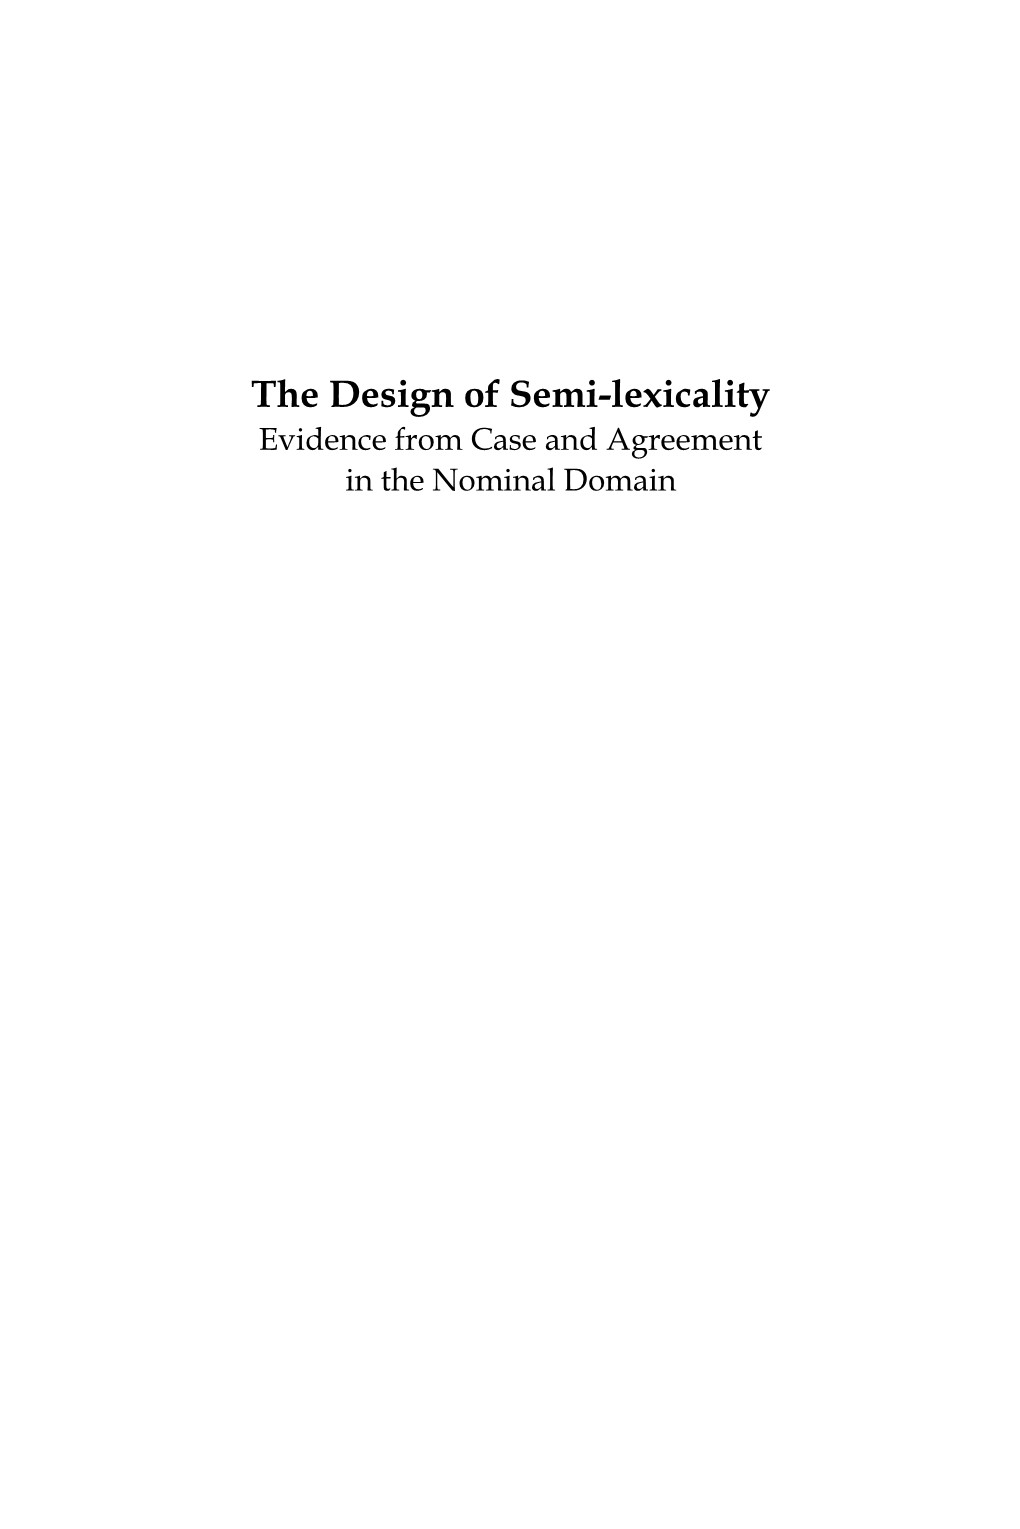 The Design of Semi-Lexicality: Evidence from Case and Agreement in the Nominal Domain